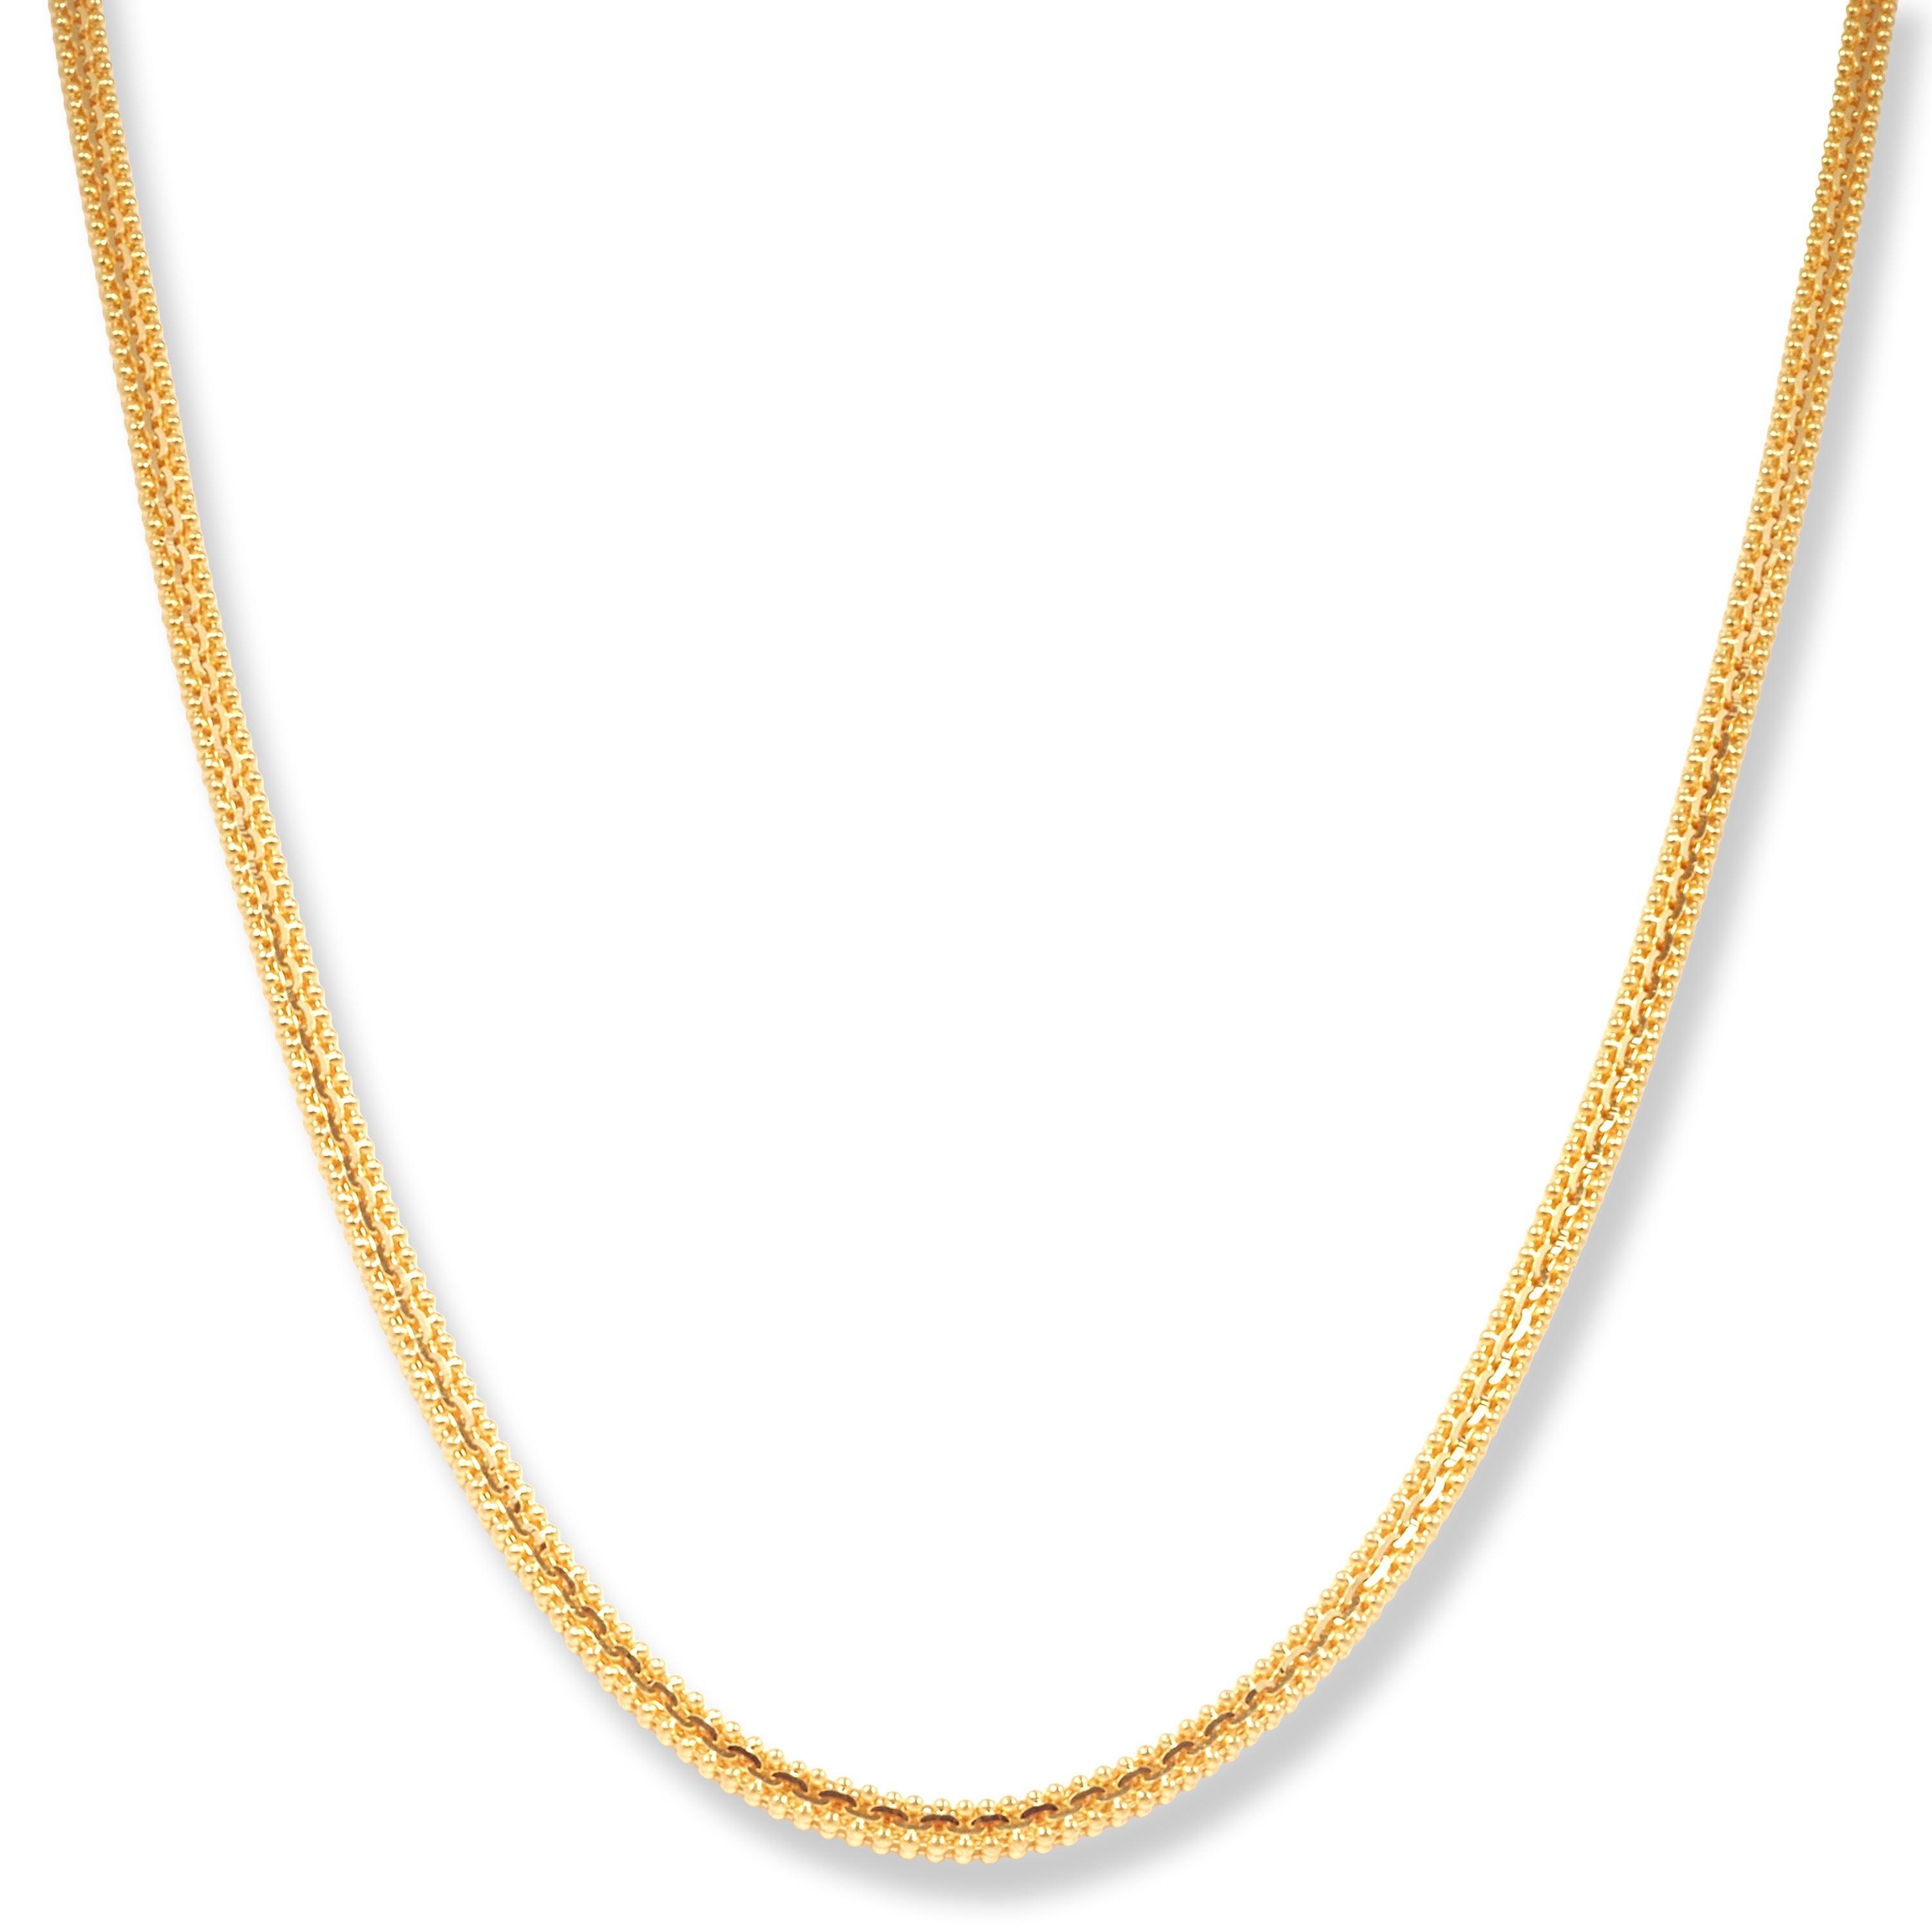 22ct Gold Double Sided Beaded Chain with Lobster Clasp C-1735 - Minar Jewellers